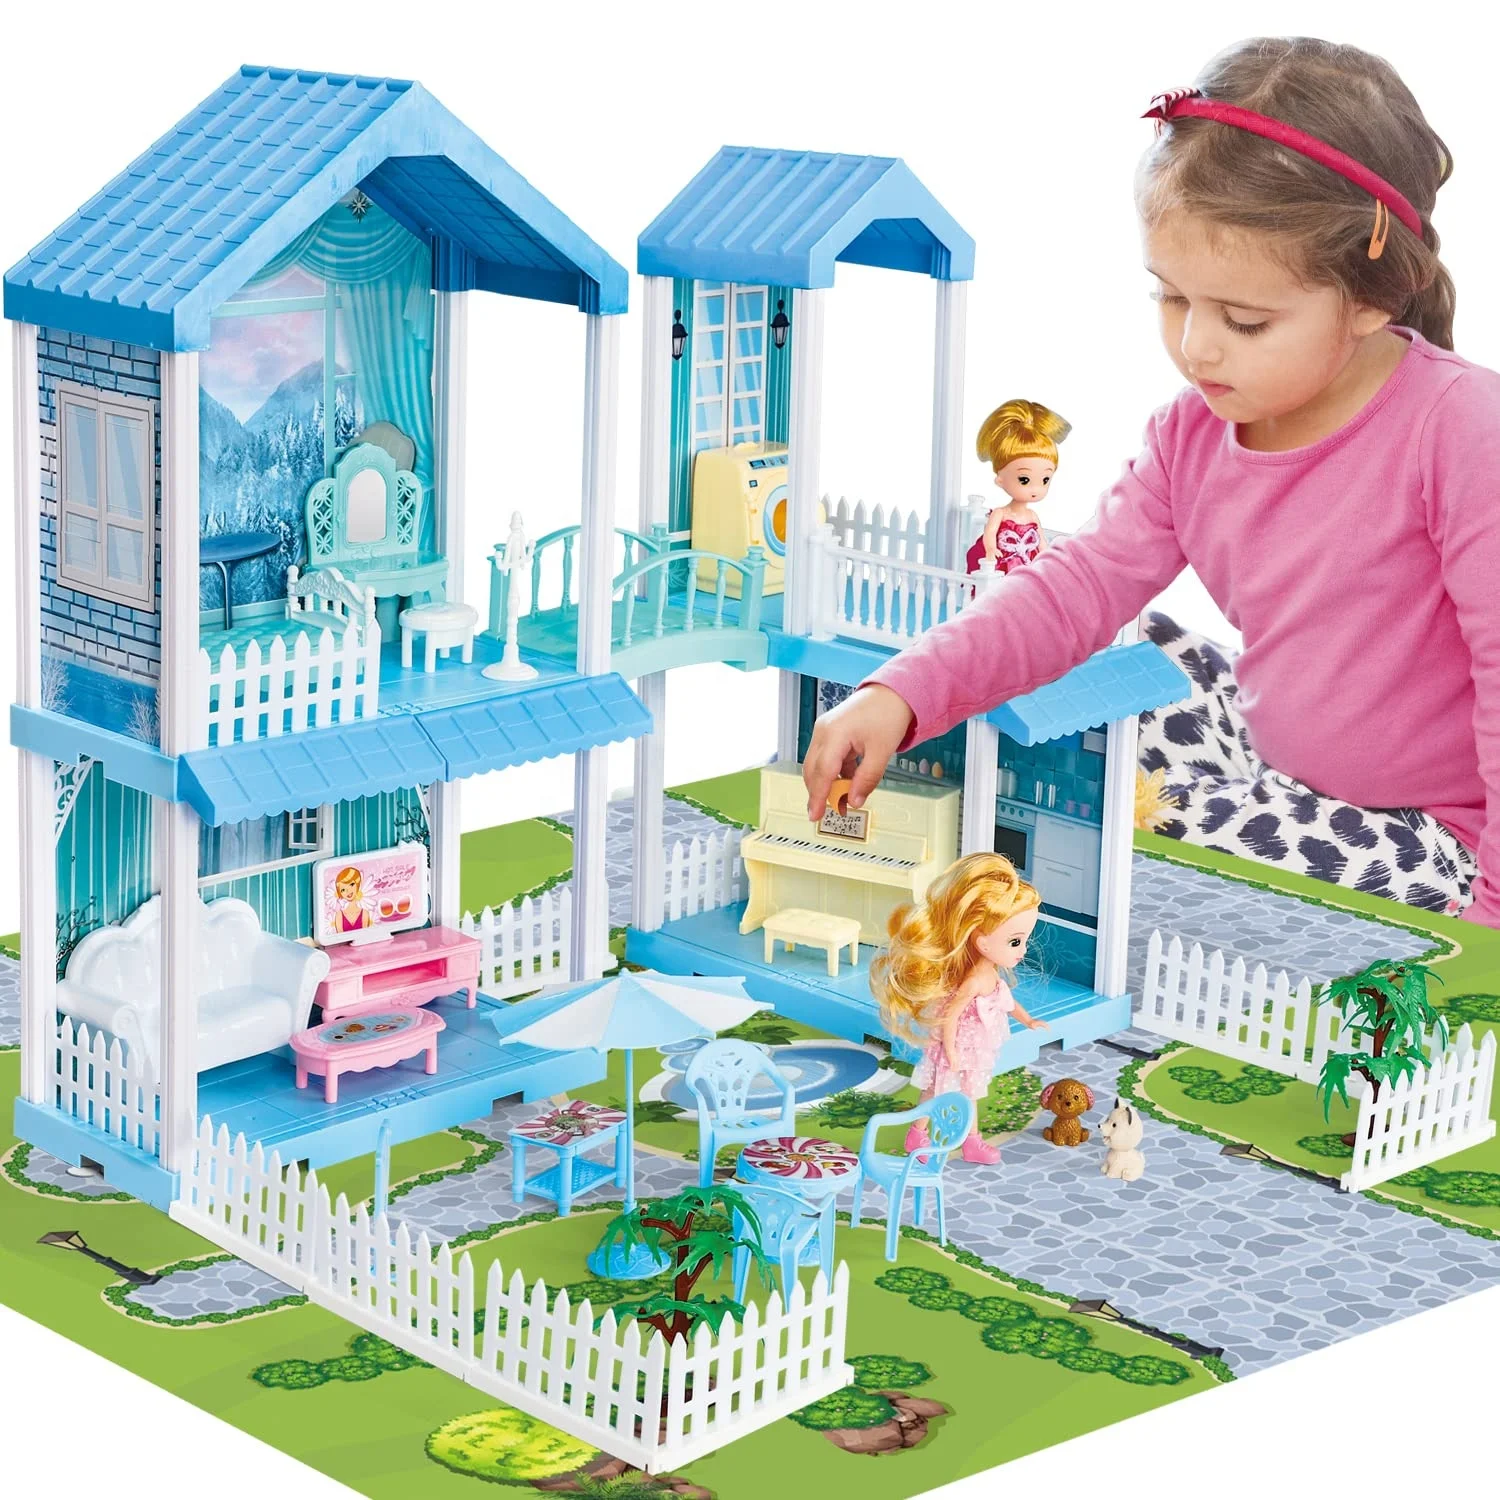 

(Only for US customers) TOY Life Princess Girl Dream Light Accessories Furniture DIY Assembly Large Blue Doll House with Map